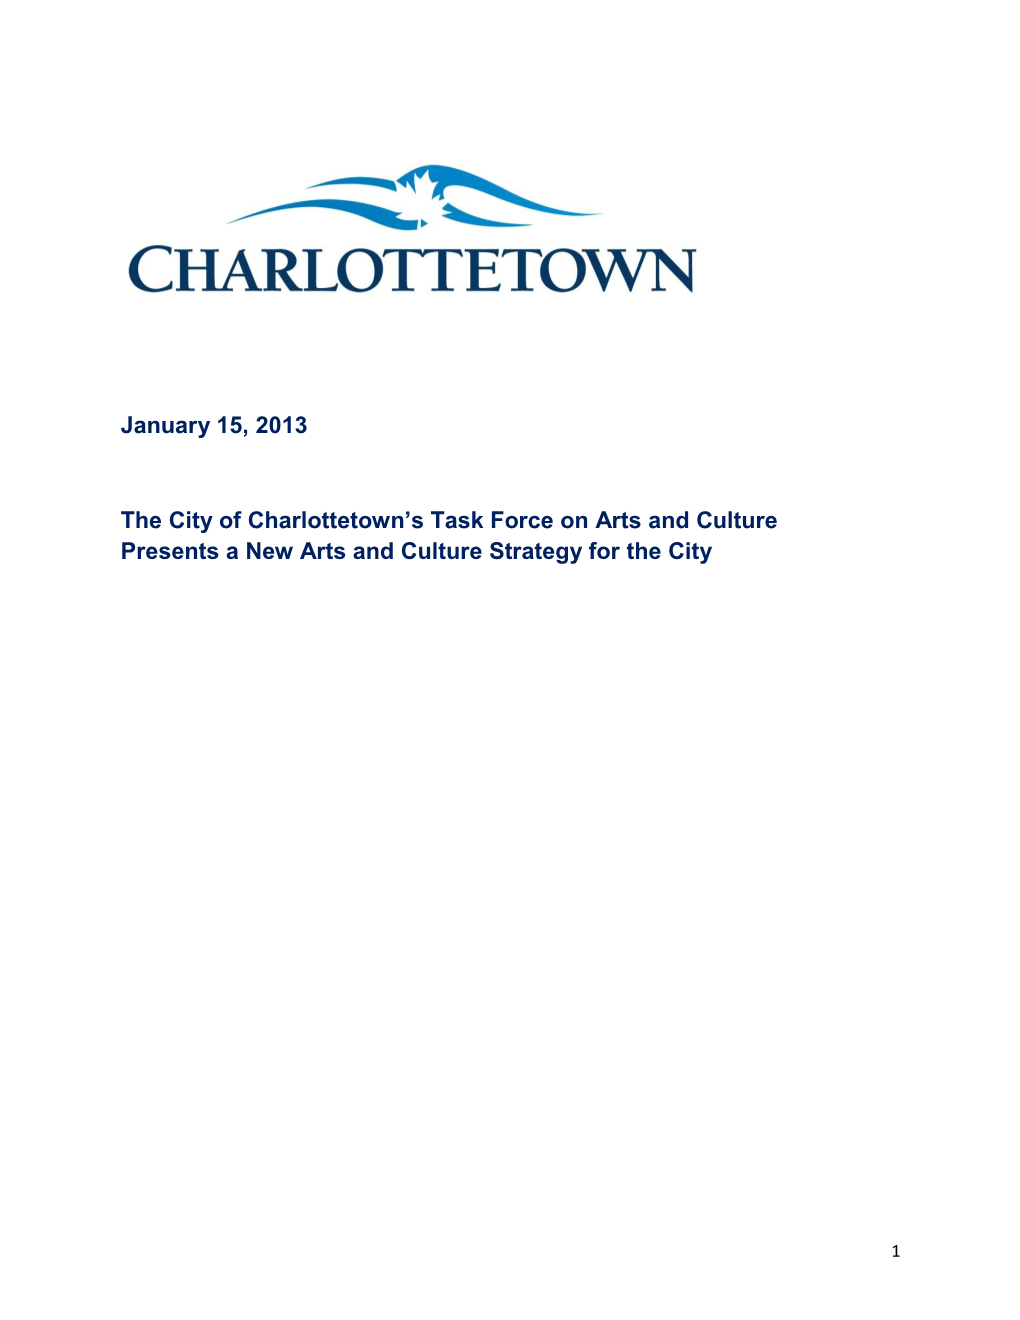 January 15, 2013 the City of Charlottetown's Task Force on Arts